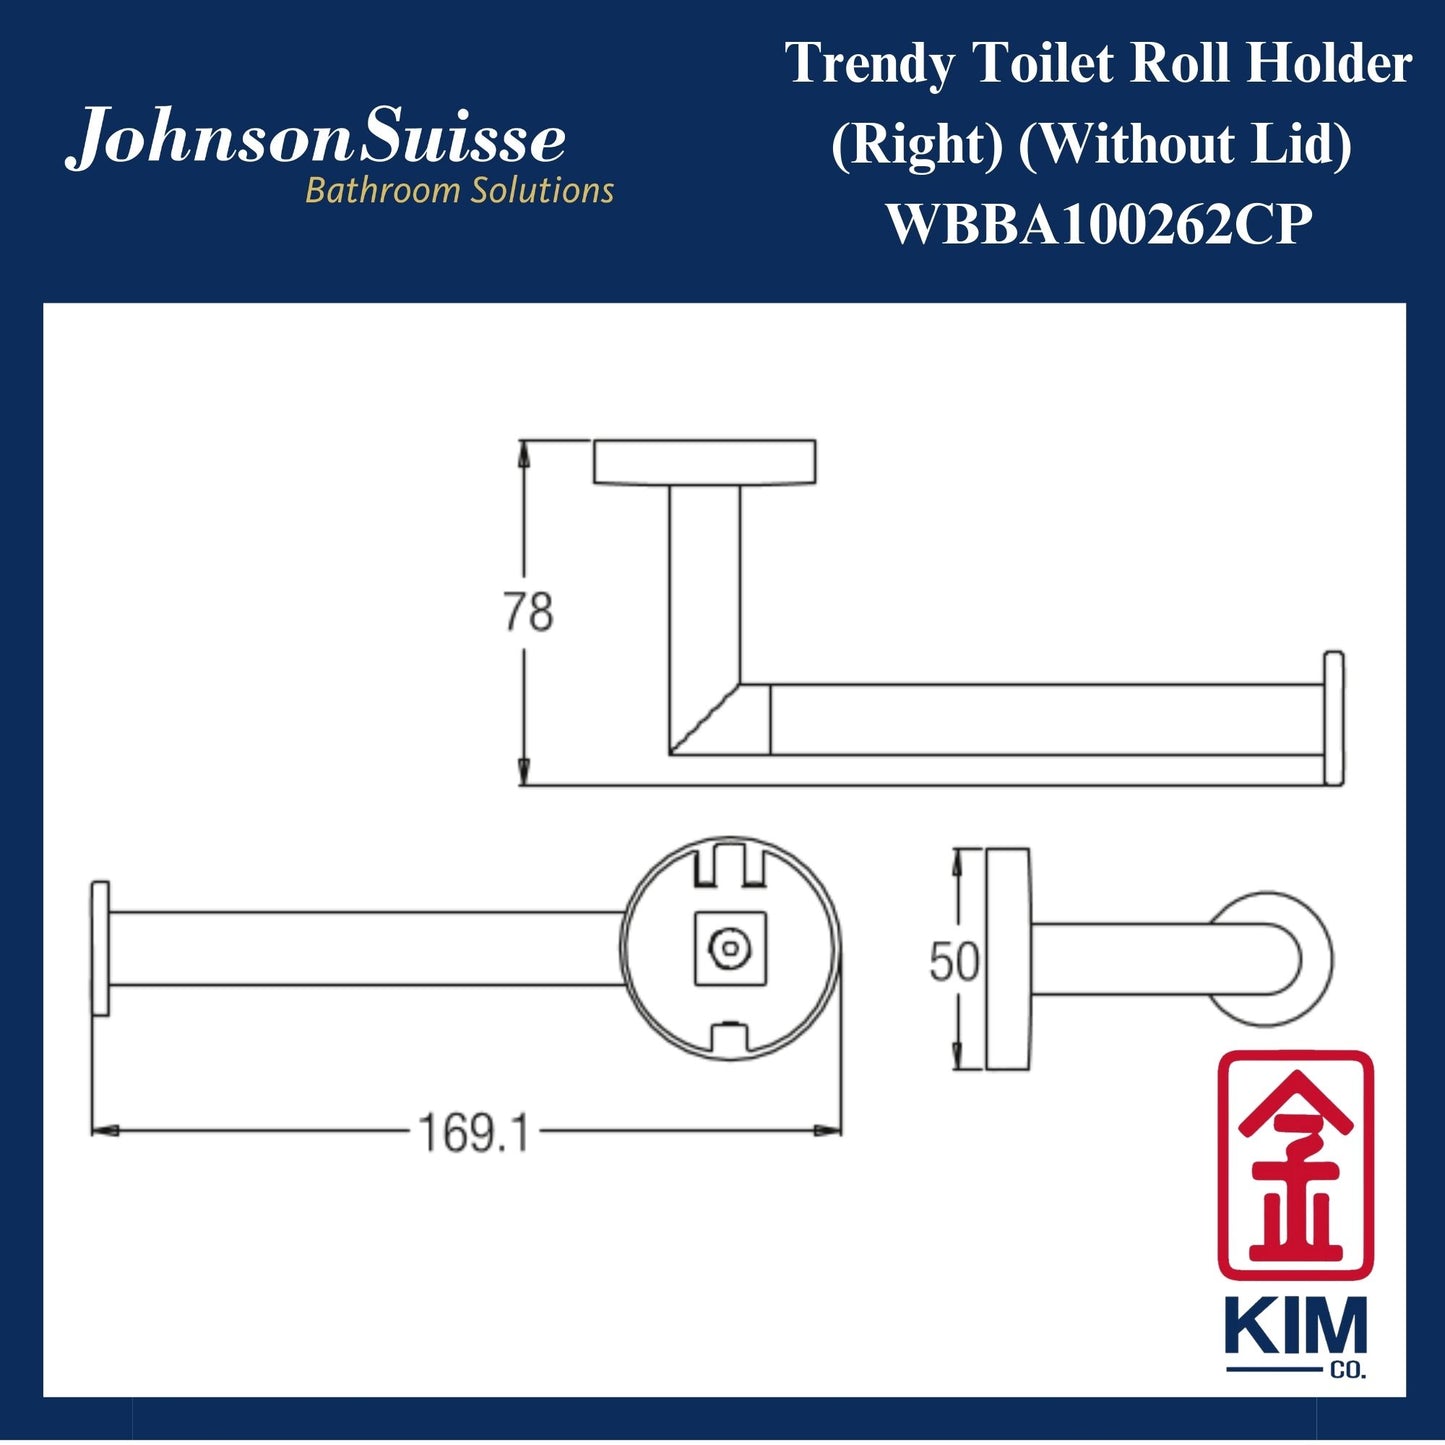 Johnson Suisse Trendy Toilet Roll Holder Without Lid (Right) (WBBA100262CP)